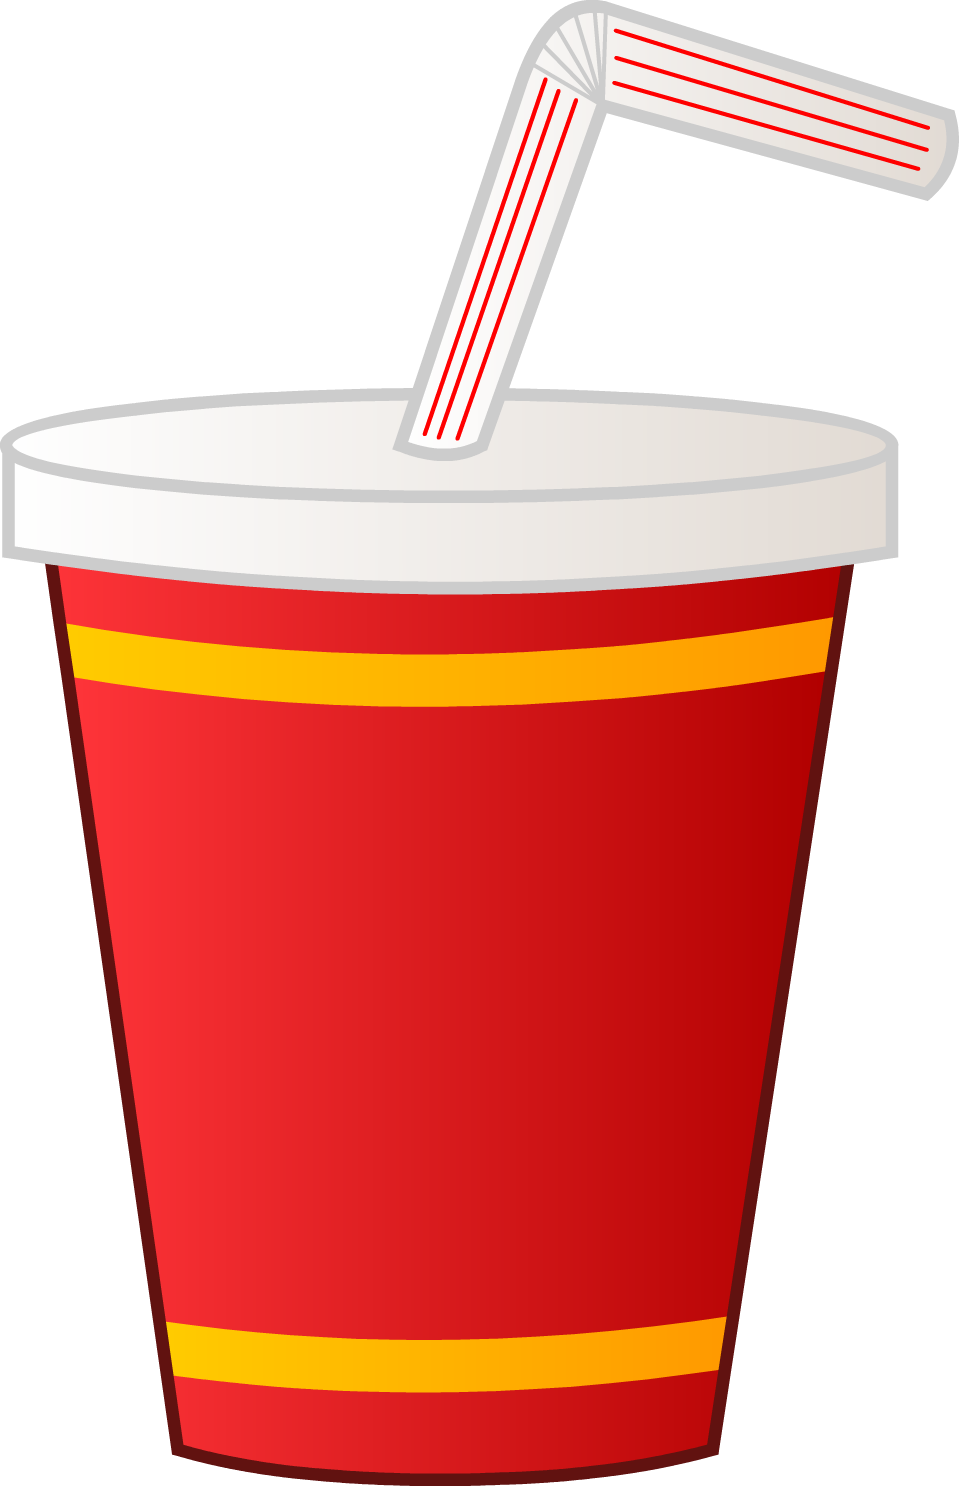 Movies clipart soda, Movies soda Transparent FREE for download on